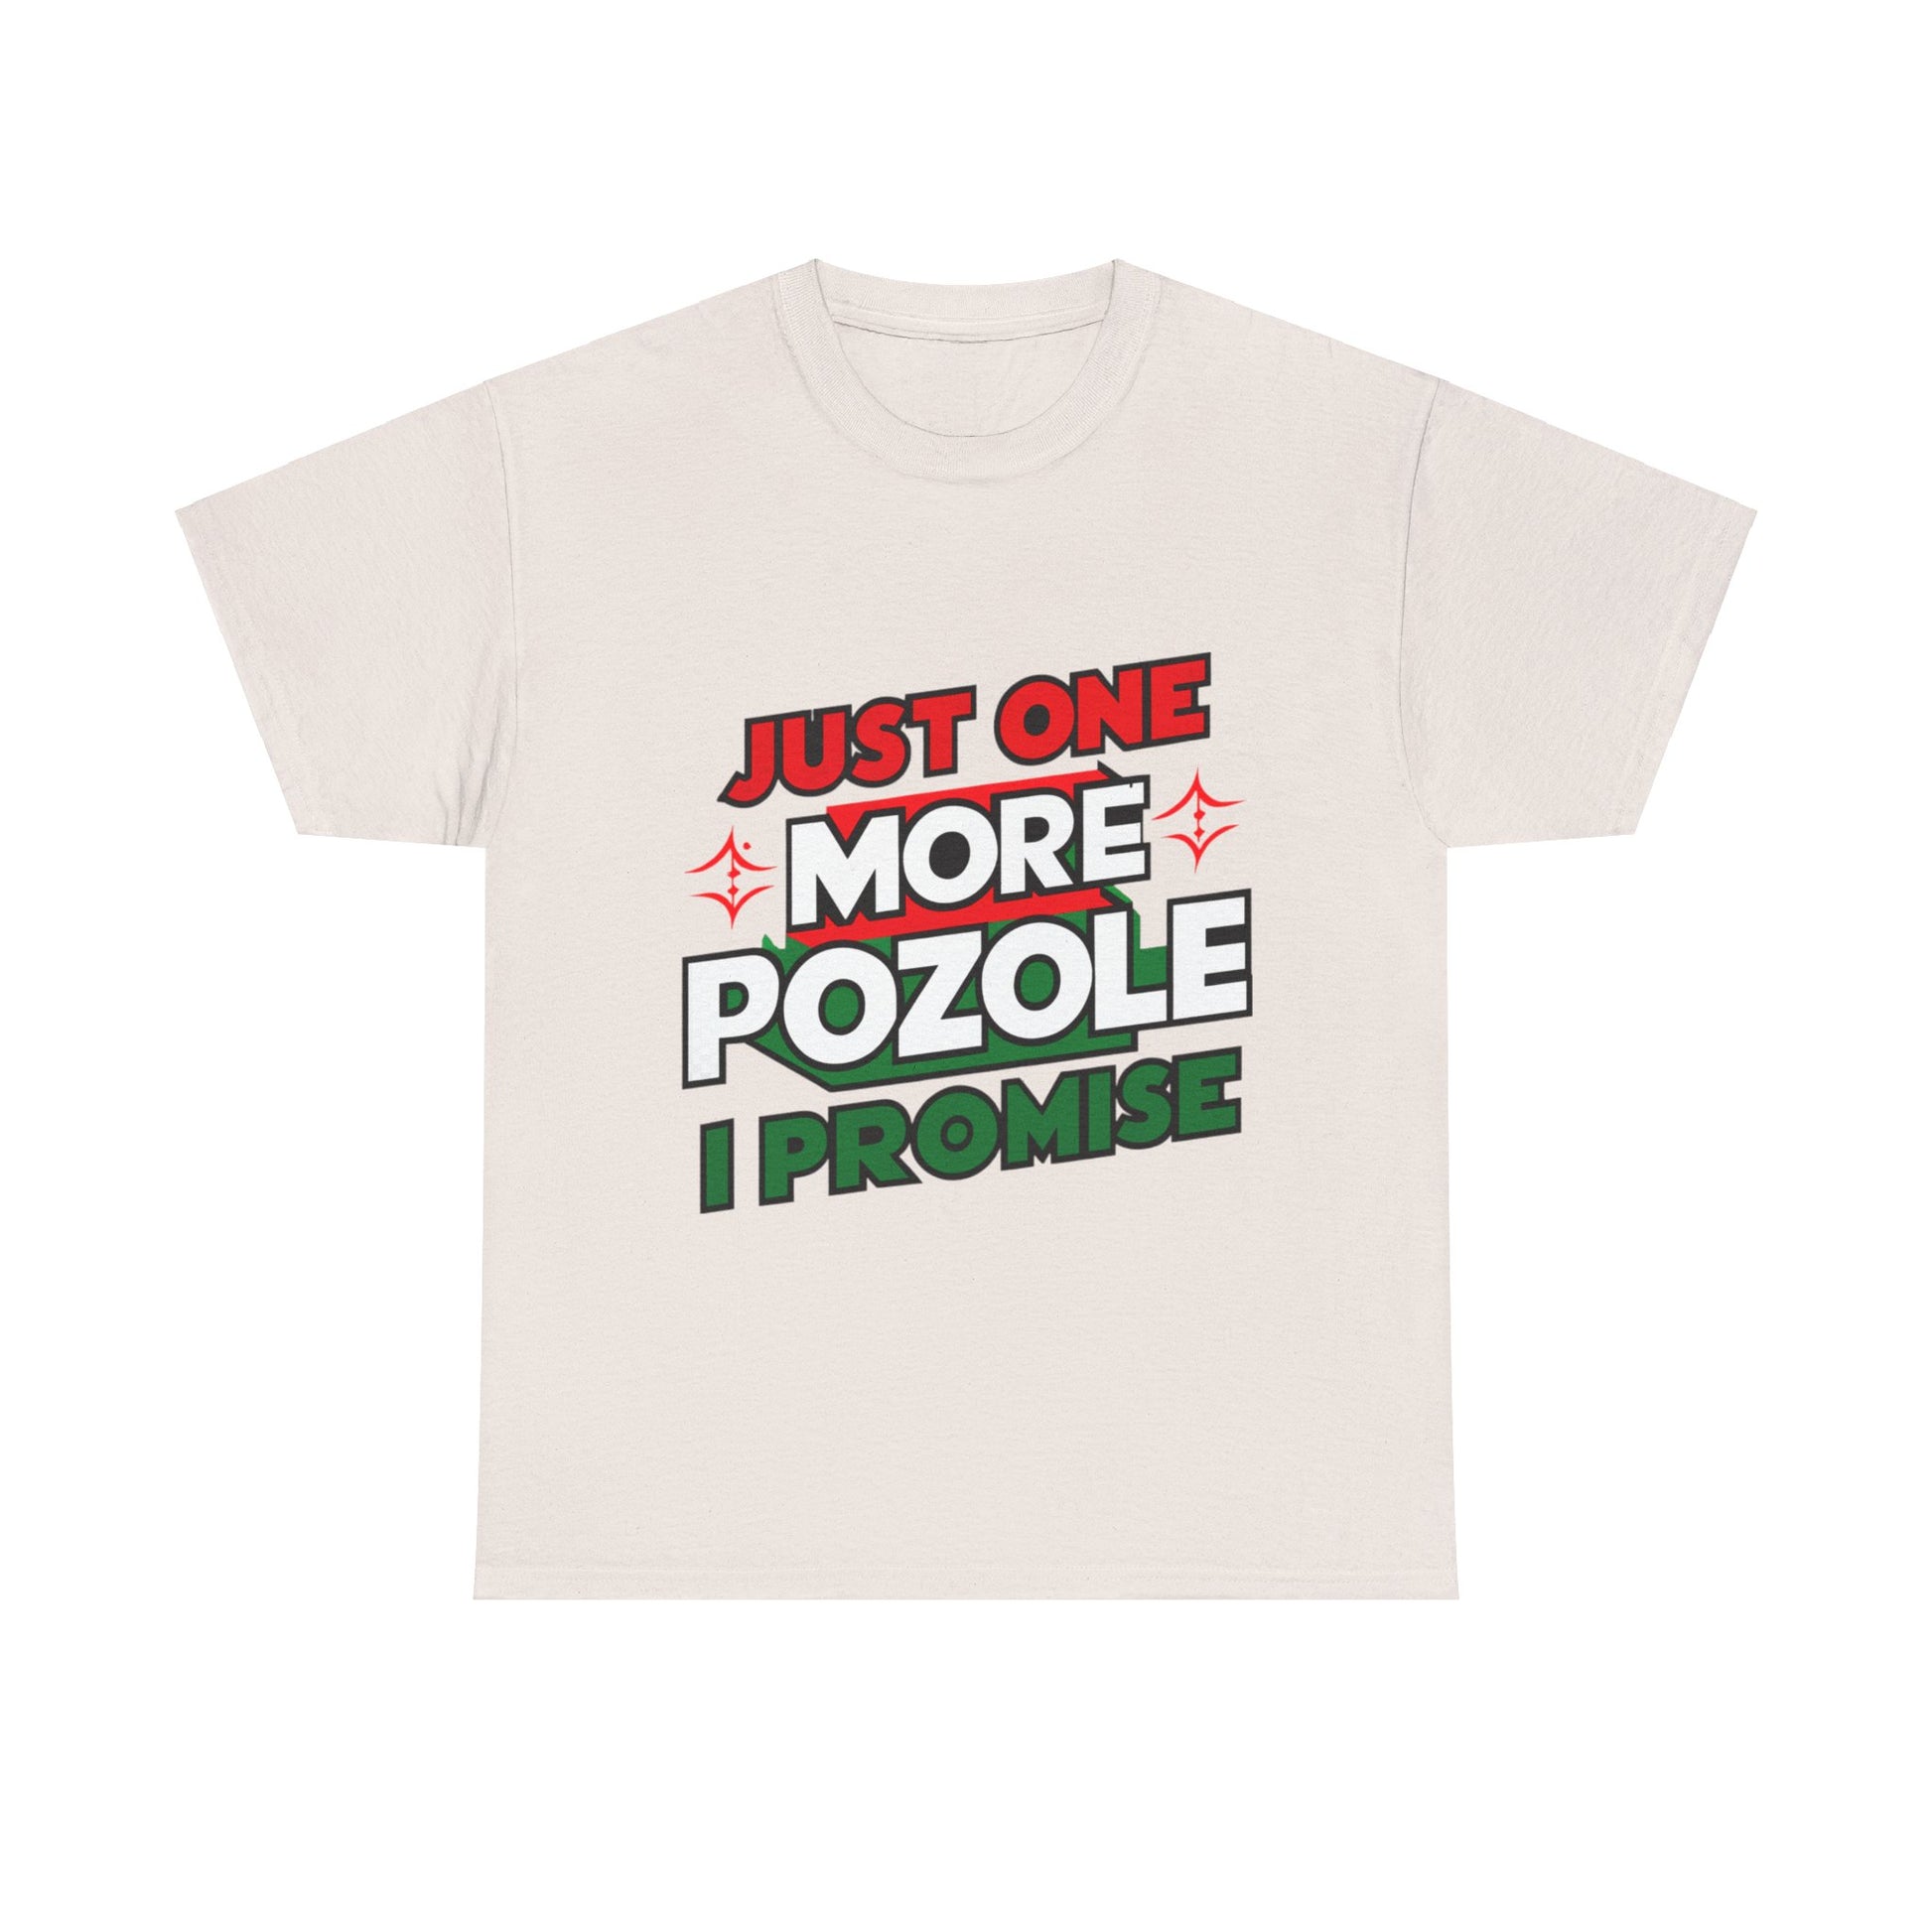 Just One More Pozole I Promise Mexican Food Graphic Unisex Heavy Cotton Tee Cotton Funny Humorous Graphic Soft Premium Unisex Men Women Ice Gray T-shirt Birthday Gift-12